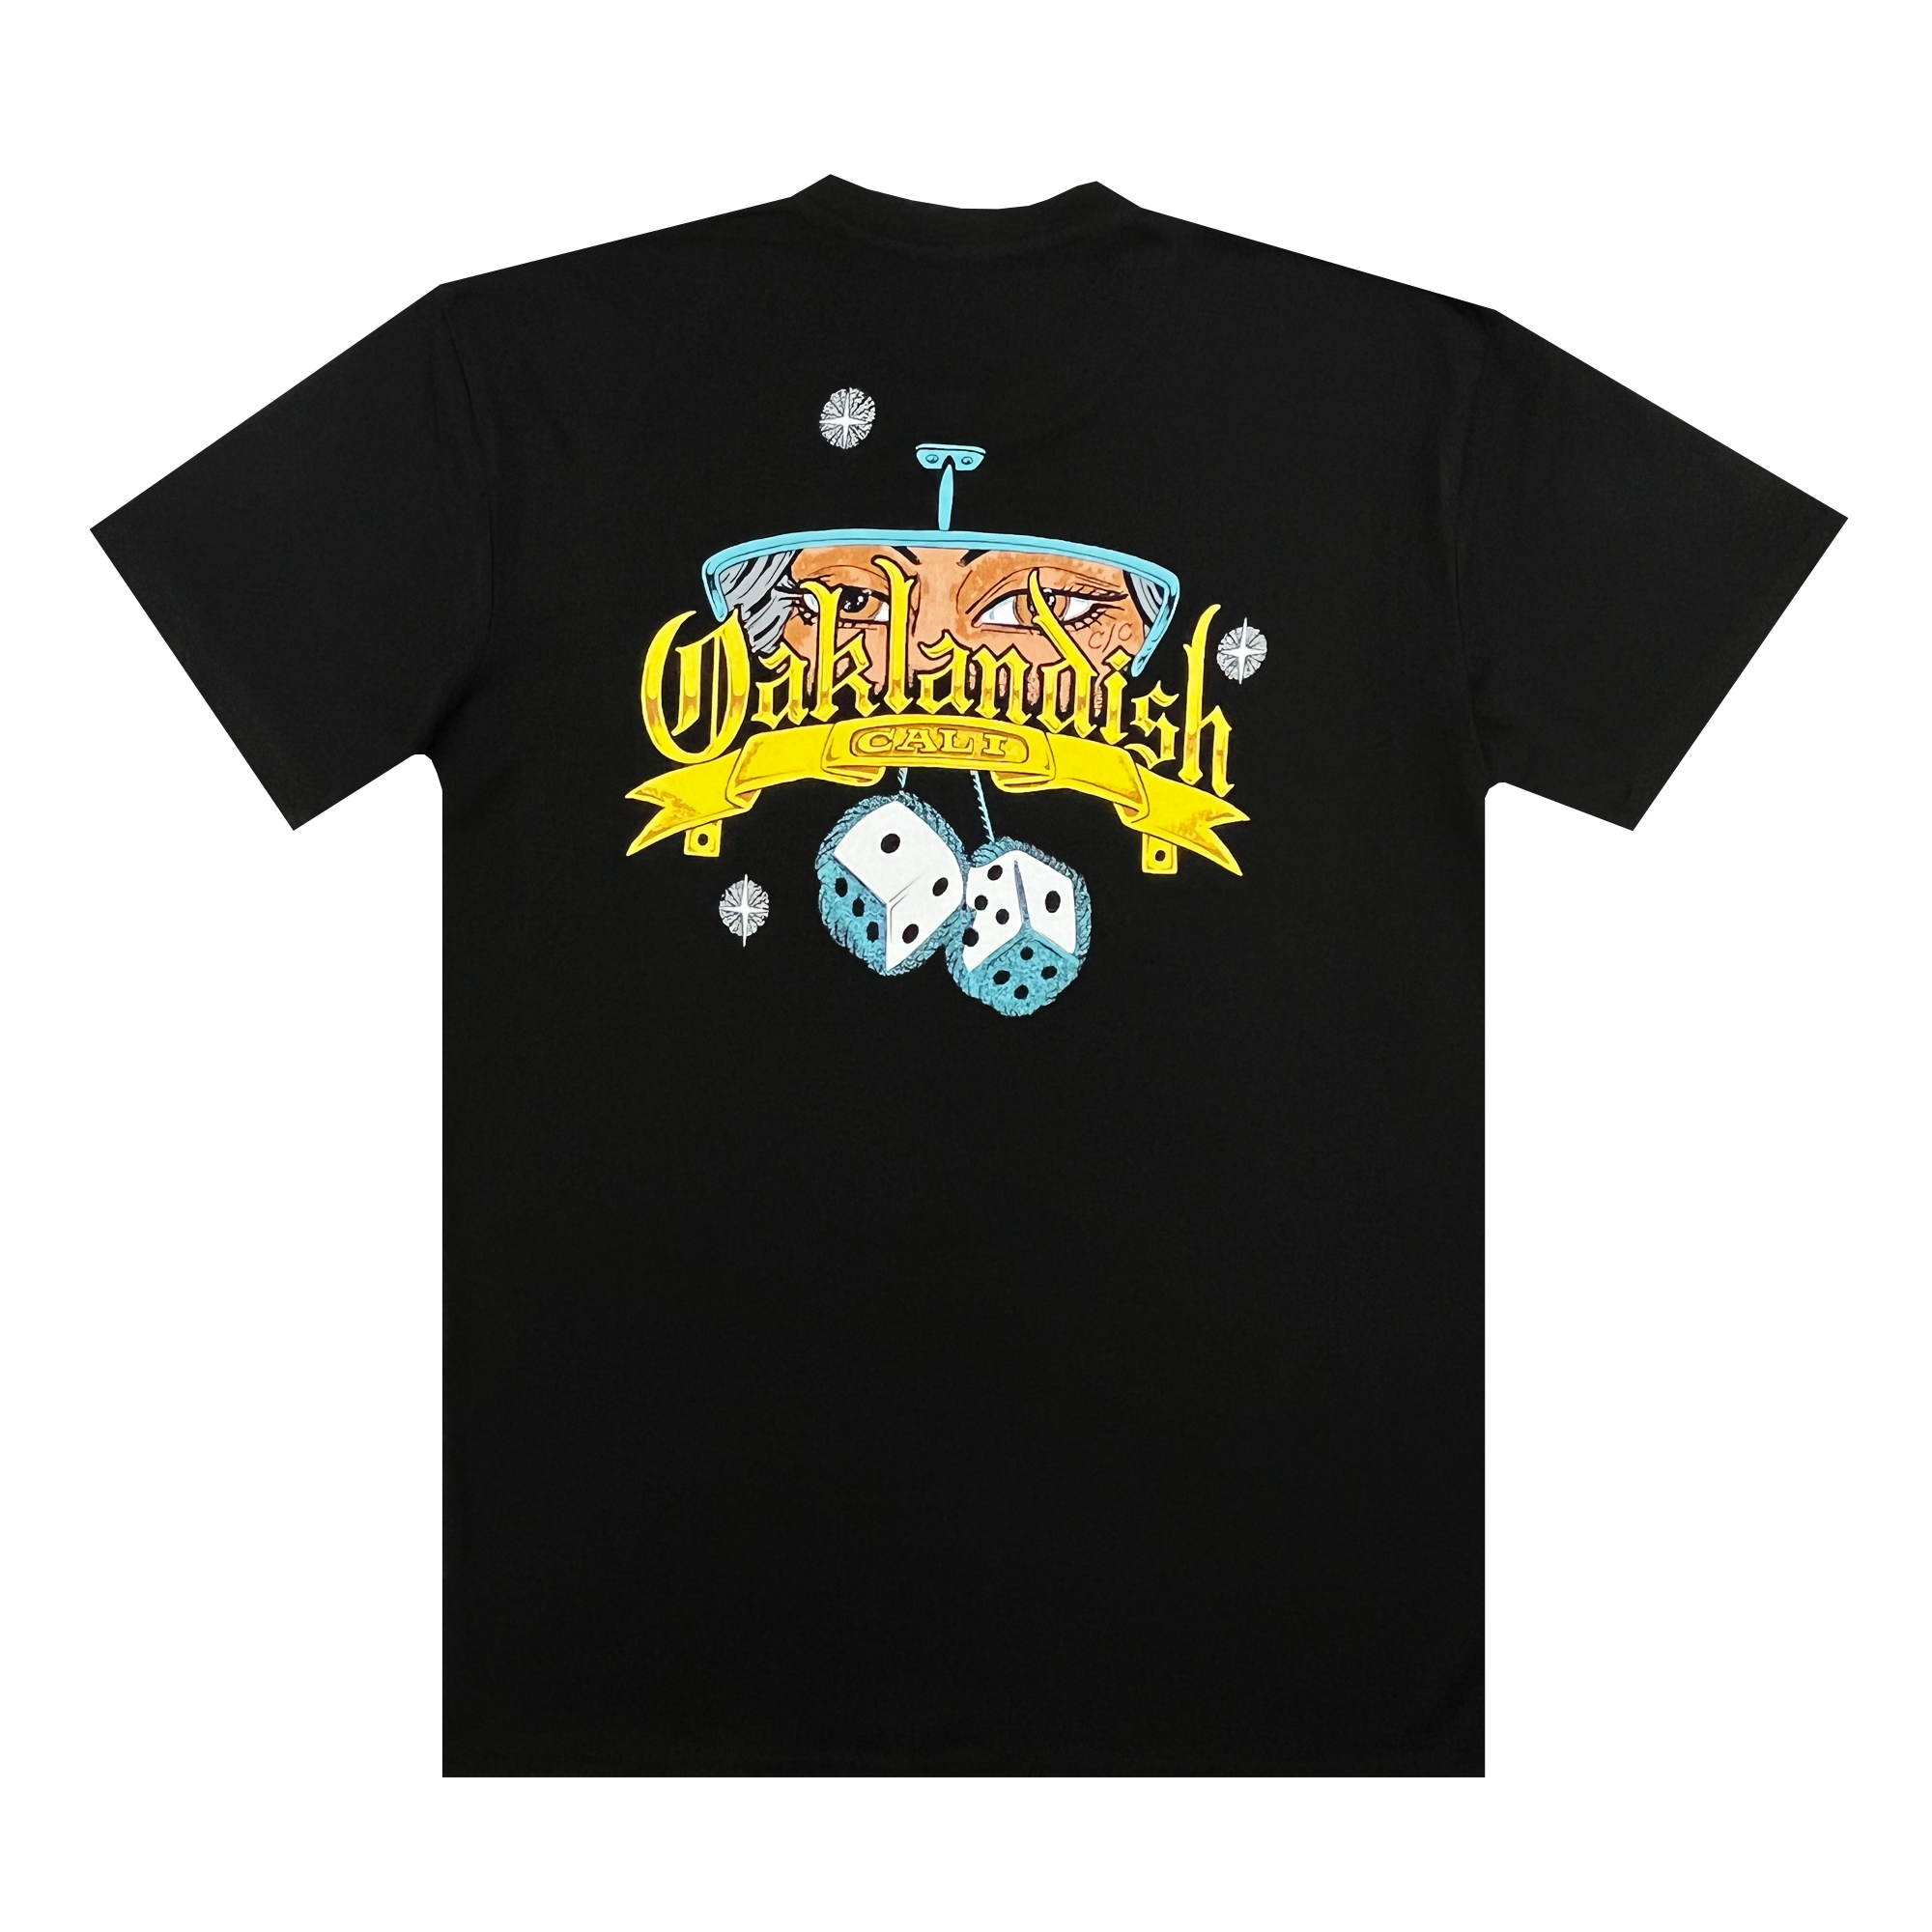 The backside of a black Oaklandish t-shirt with Oakland Crusin's graphic featuring a stylized rear view mirror and hanging dice.